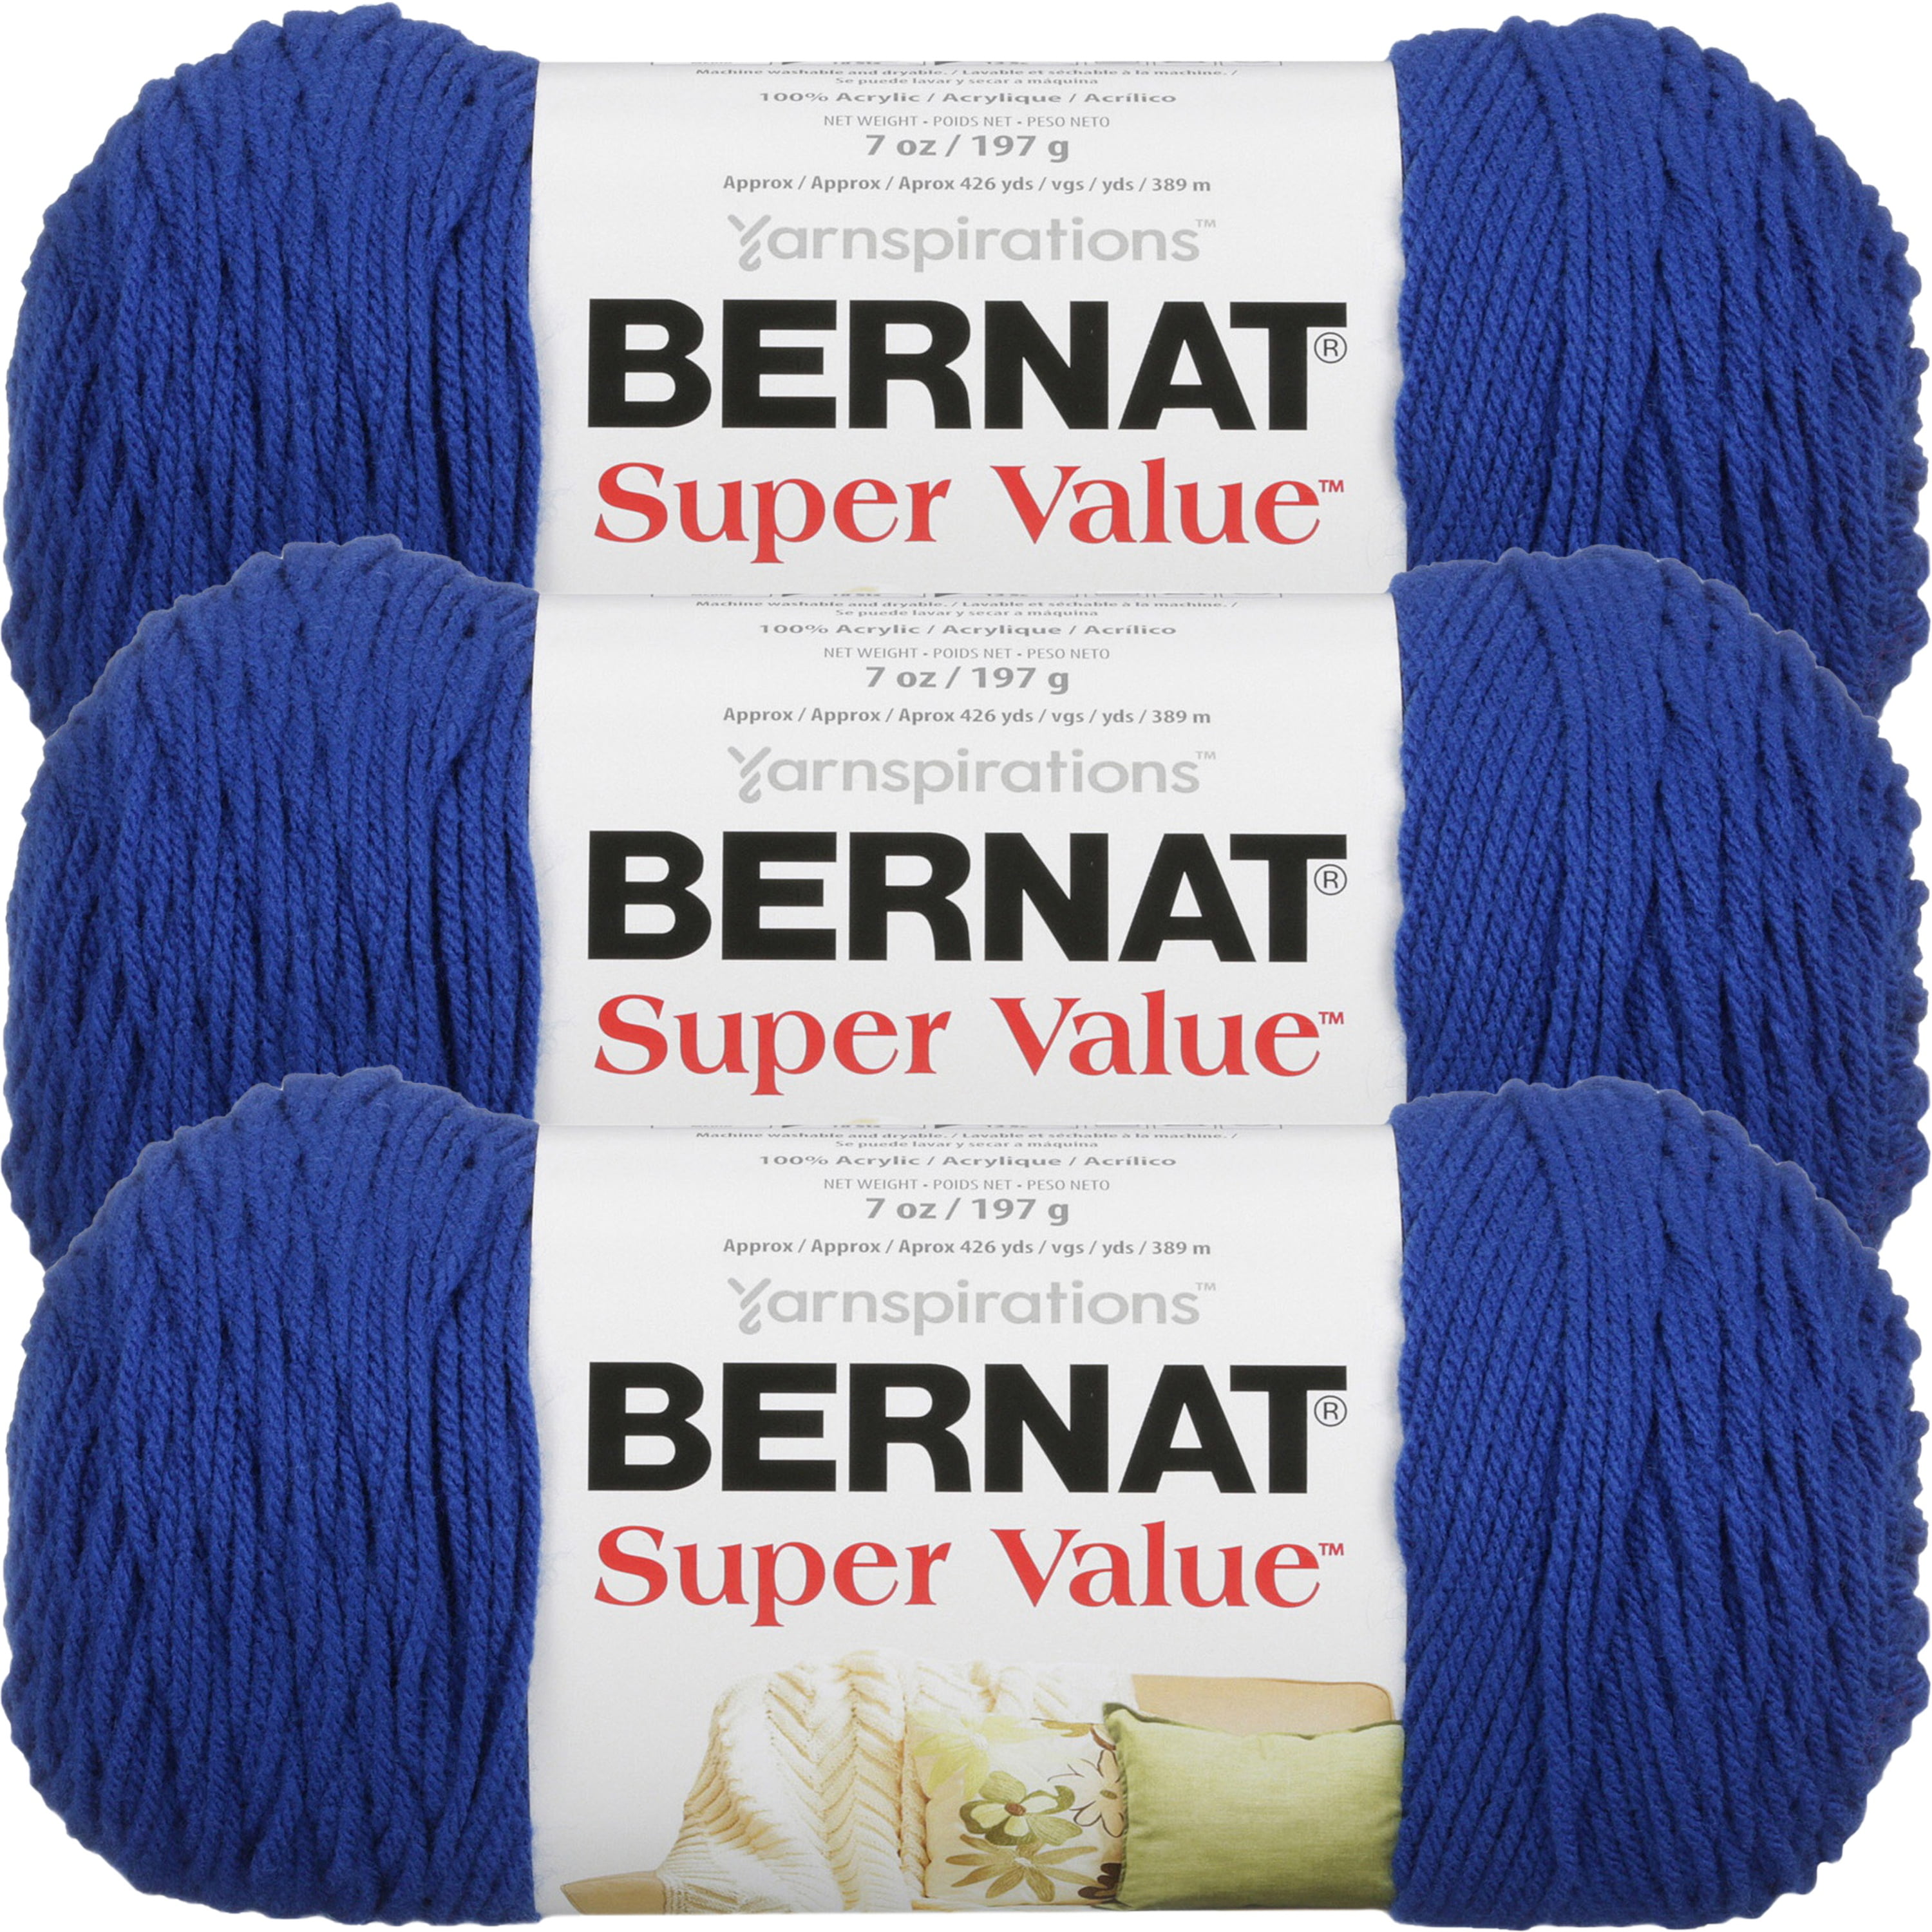 x 2 metres 5mm Royal Knitted Polyester Cord